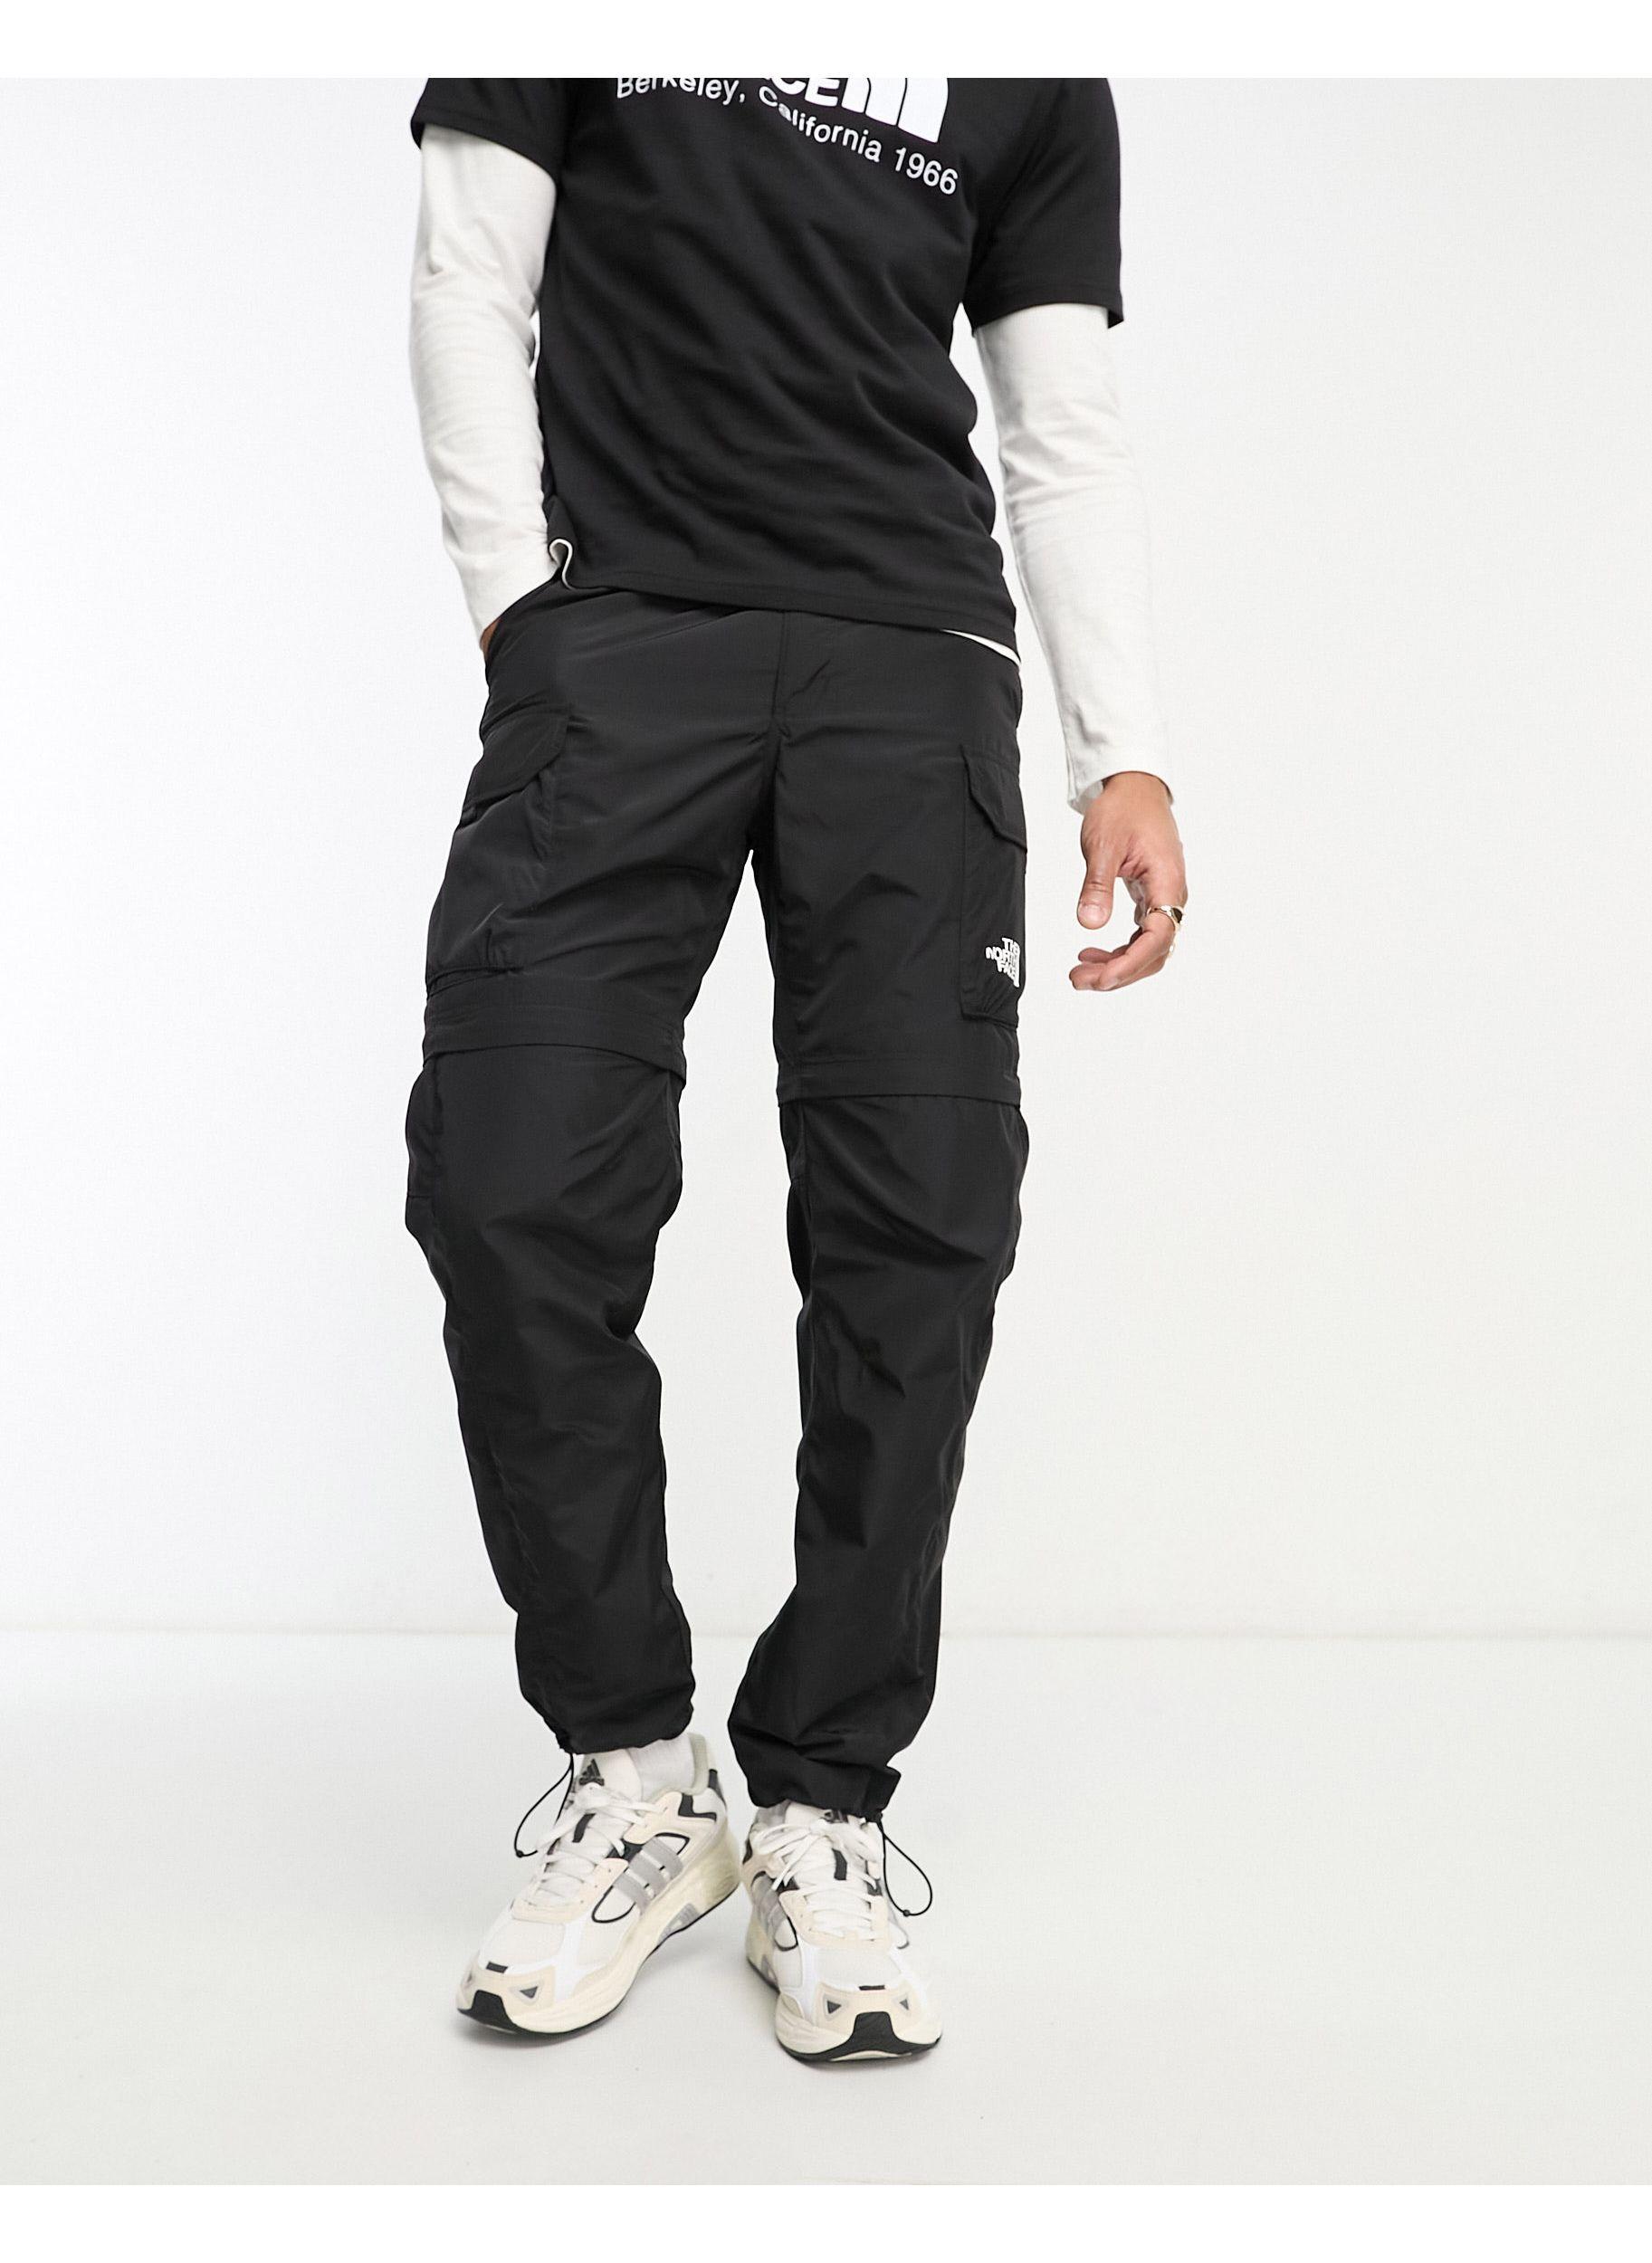 The North Face Heritage Cargo Pants Black at CareOfCarl.com